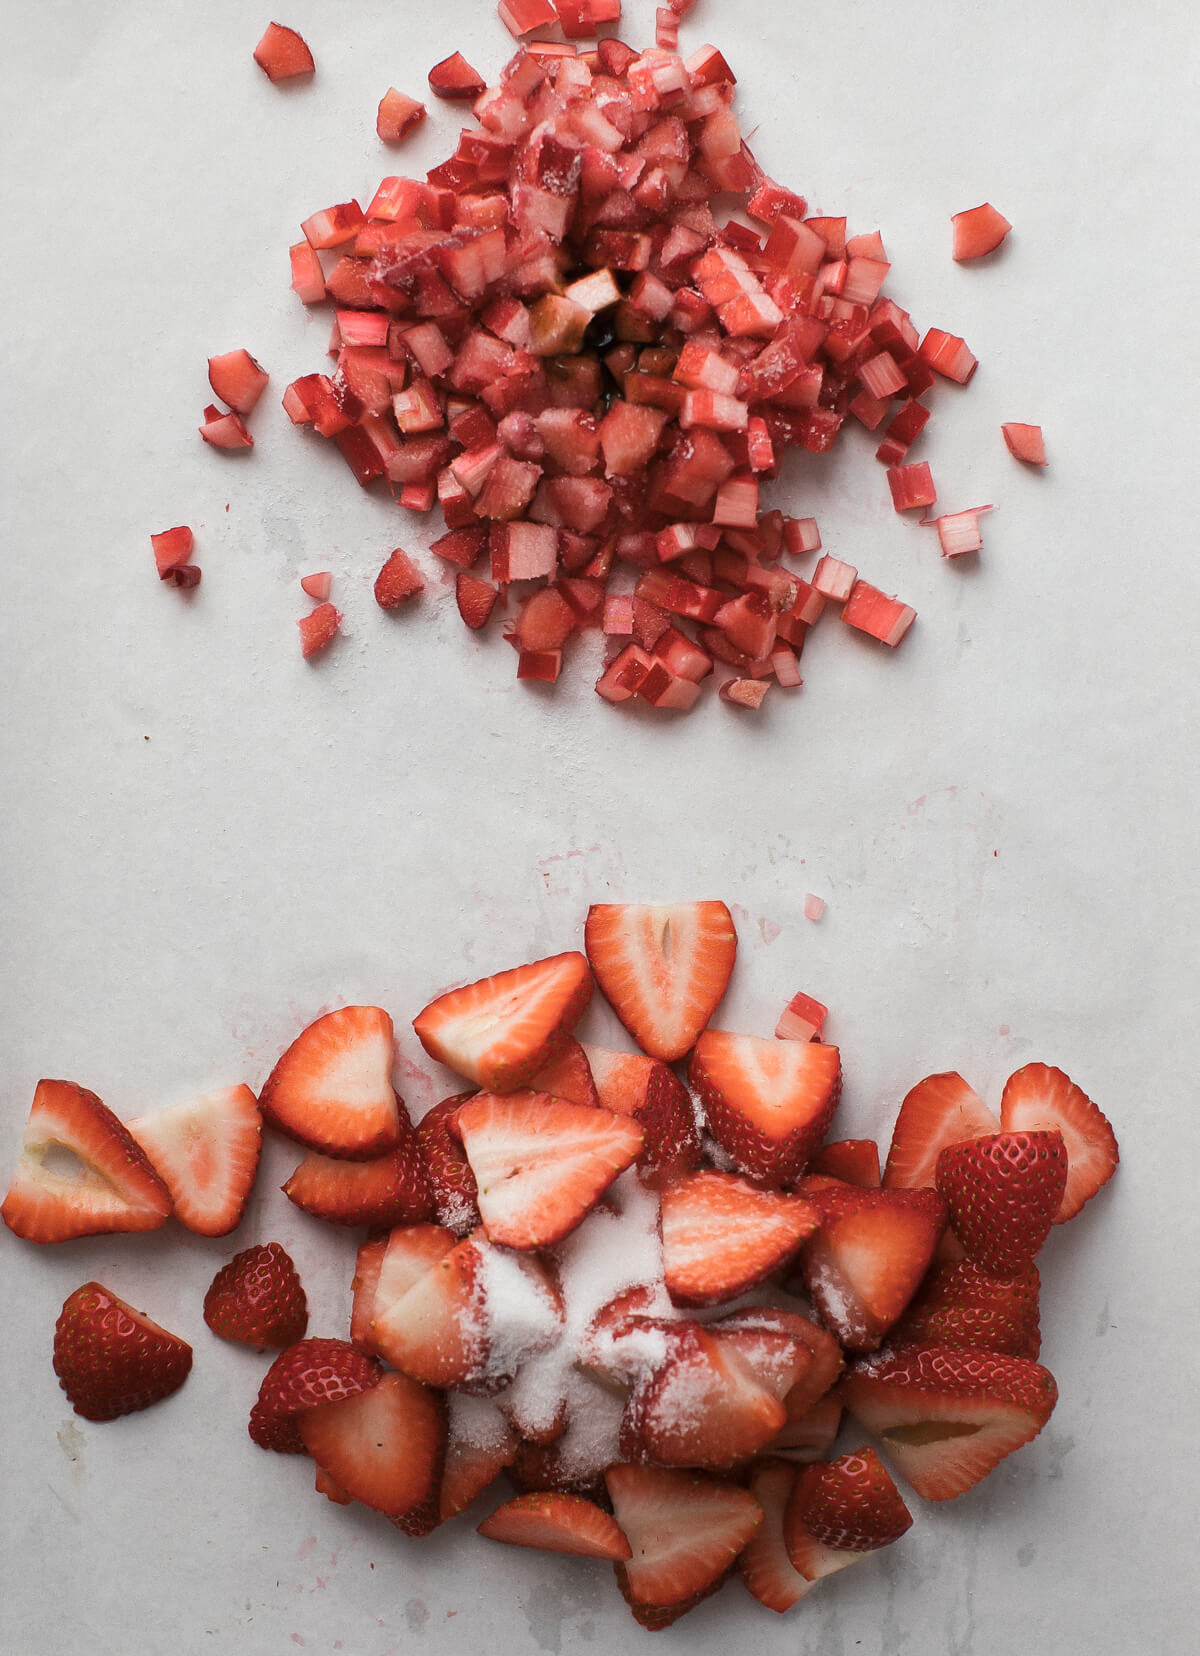 Diced rhubarb and sliced strawberries on a counter. 